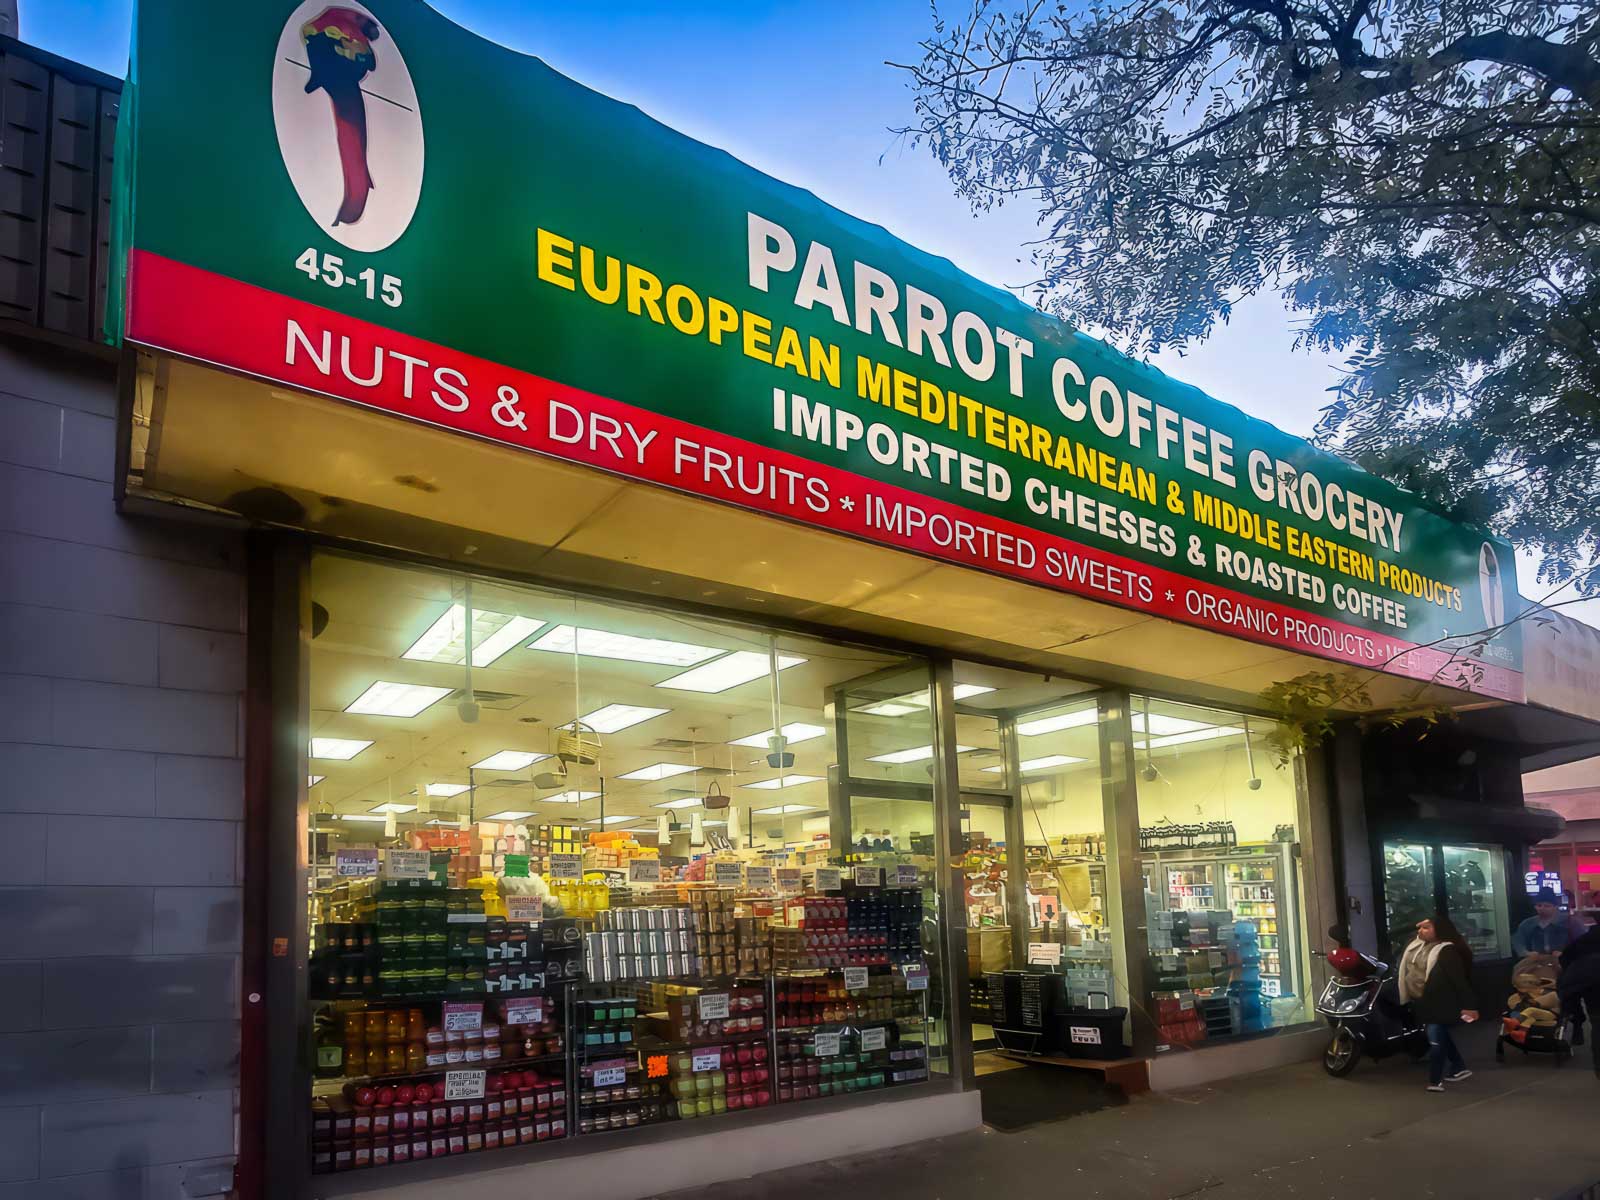 Illuminated storefront of Parrot Coffee Grocery at dusk, displaying a vibrant green awning with the logo of a parrot, advertising European Mediterranean & Middle Eastern products, nuts & dry fruits, imported cheeses, and roasted coffee.